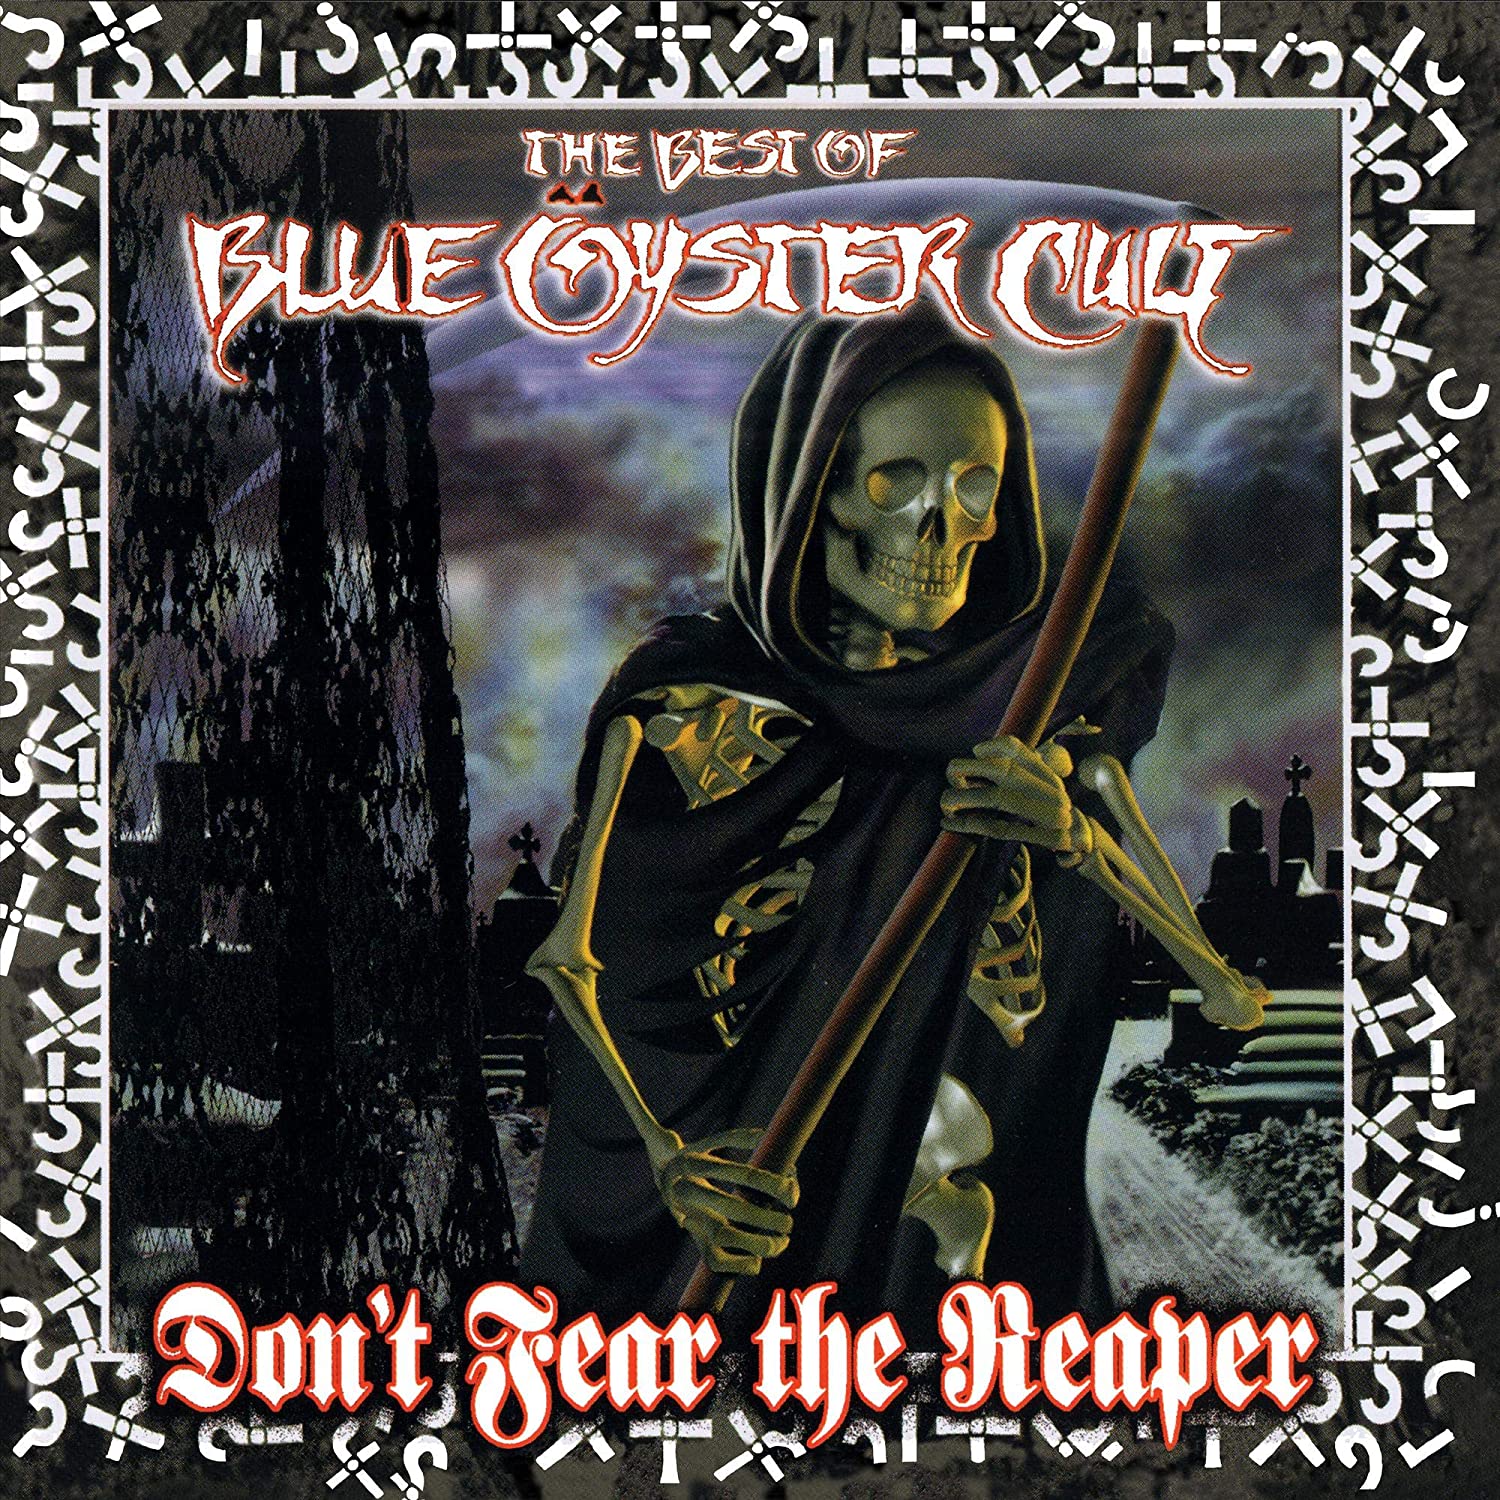 Blue Oyster Cult - The Best Of Blue Oyster Cult - Don't Fear The Reaper [Red Vinyl] [2-lp]